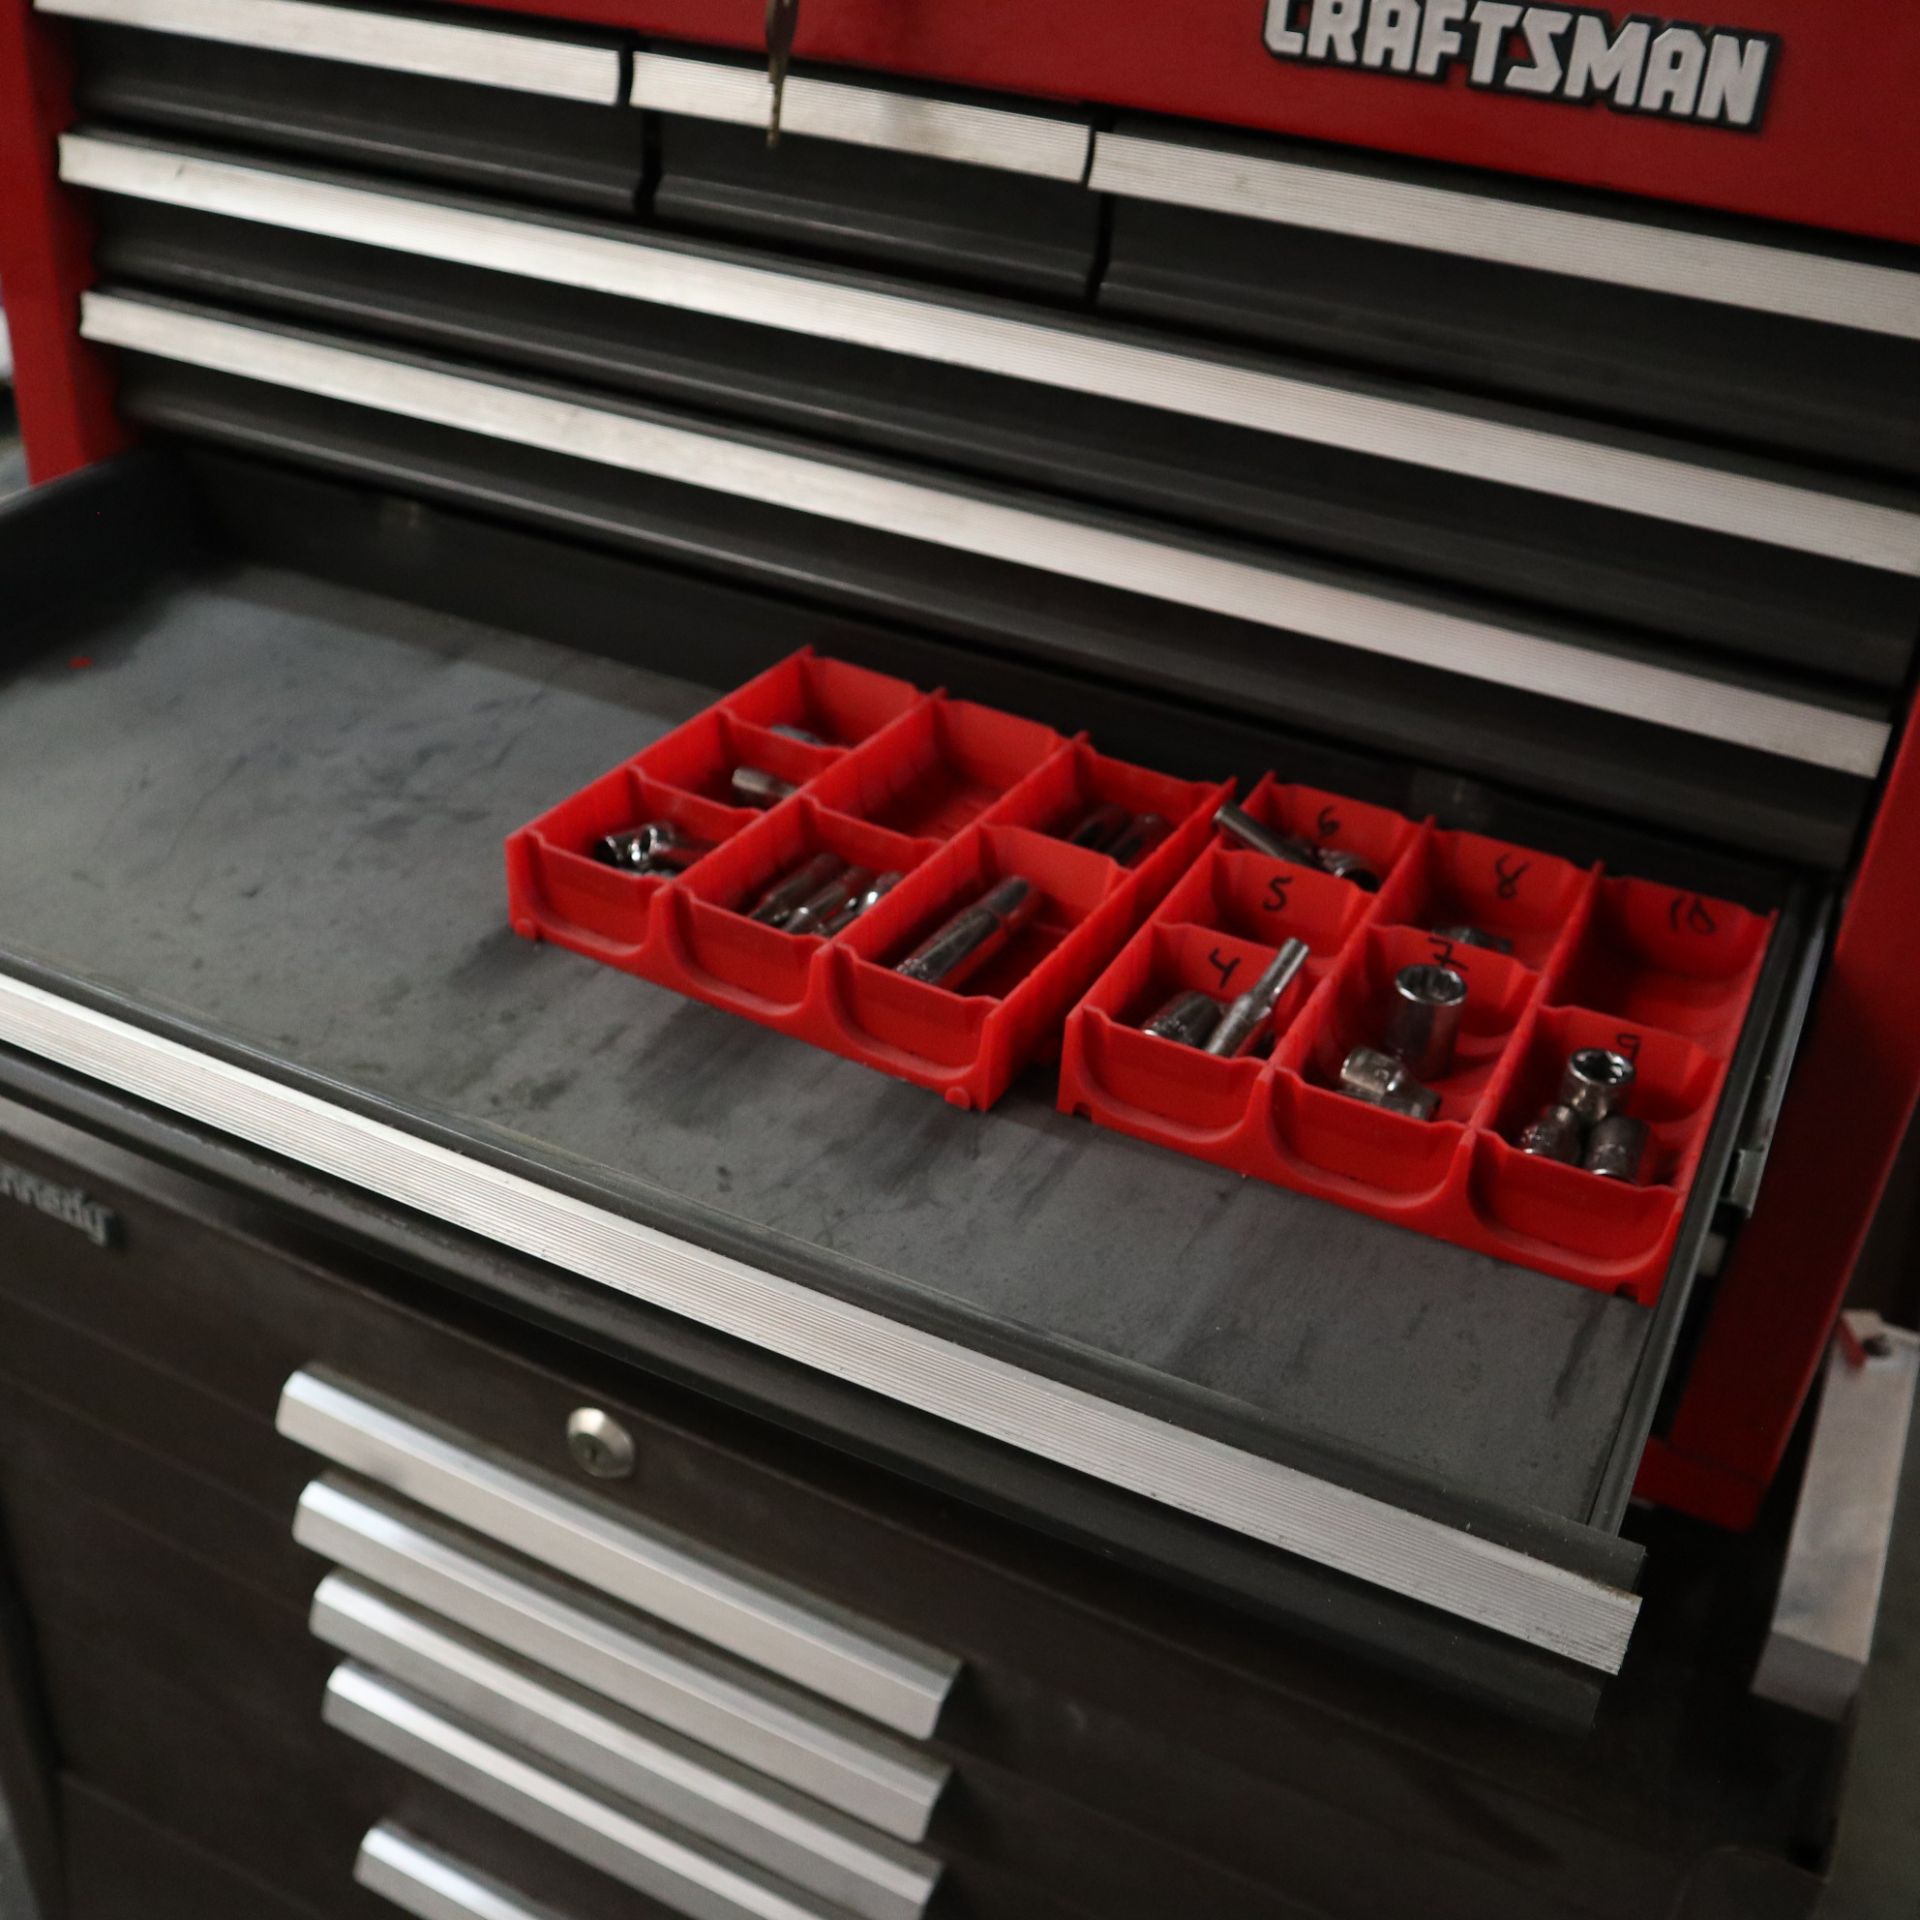 LOT TO INCLUDE: (1) CRAFTSMAN TOOLBOX 9 DRAWER WITH MISC. WRENCHES, SOCKETS, AND TOOLING - Image 7 of 14